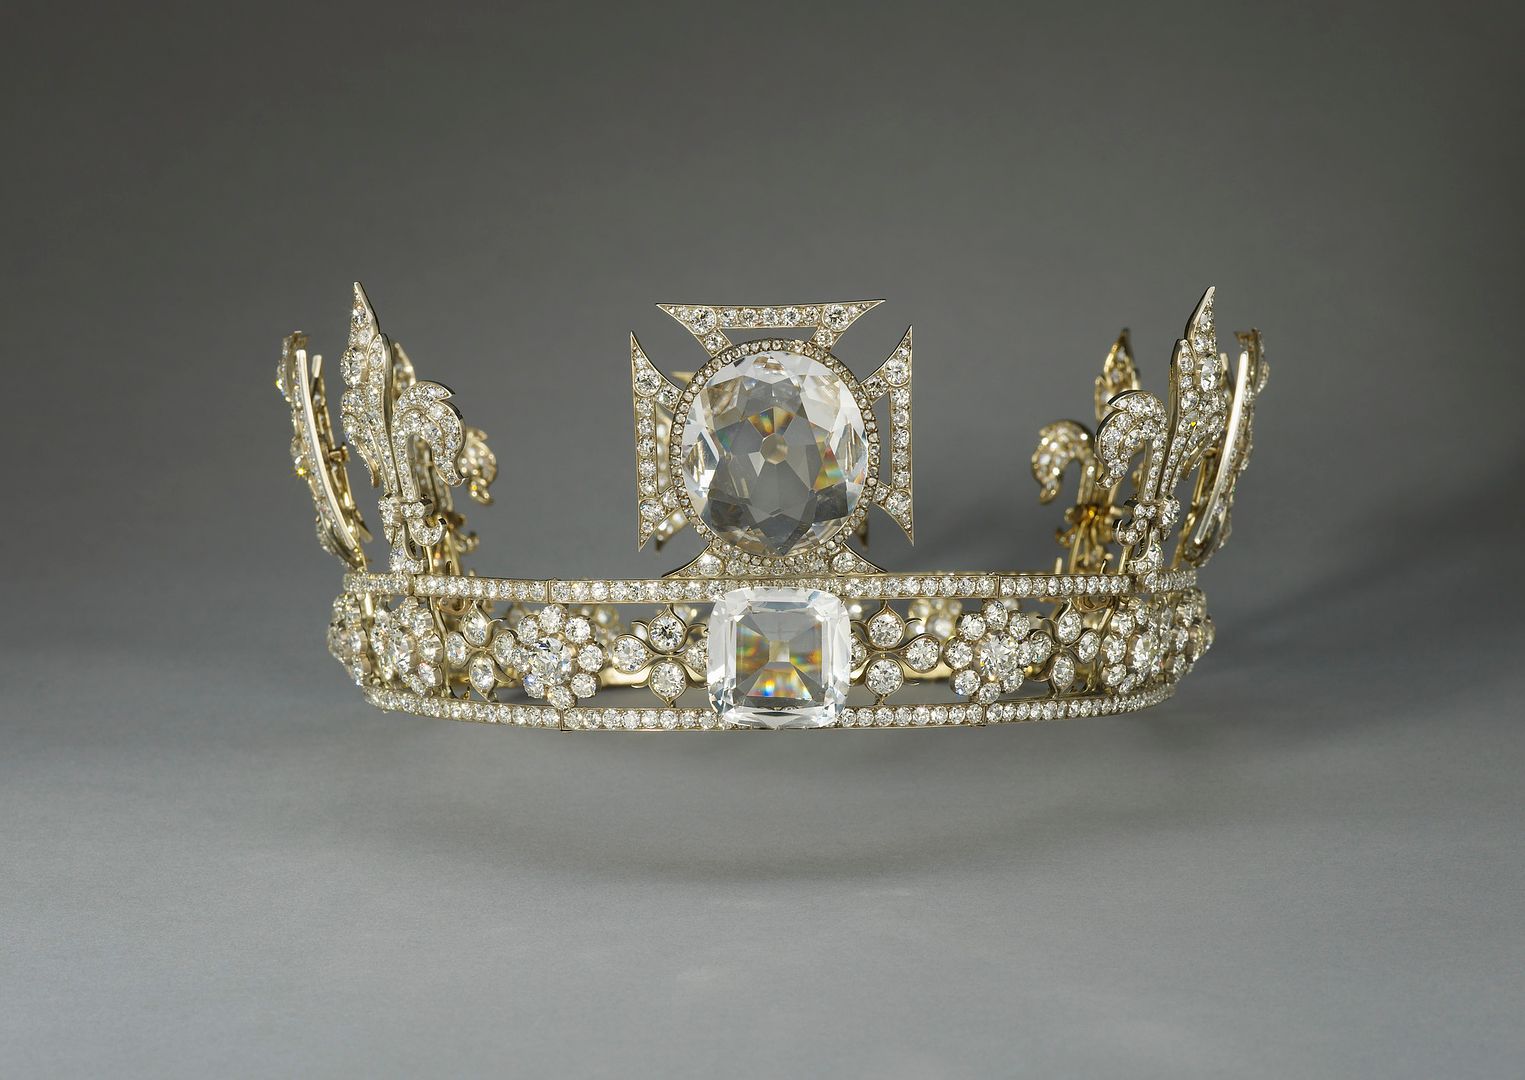 Queen_Mary_RCIN_31704_crown_without_arches_and_crystal_Cullinan_and_Koh_i_noor